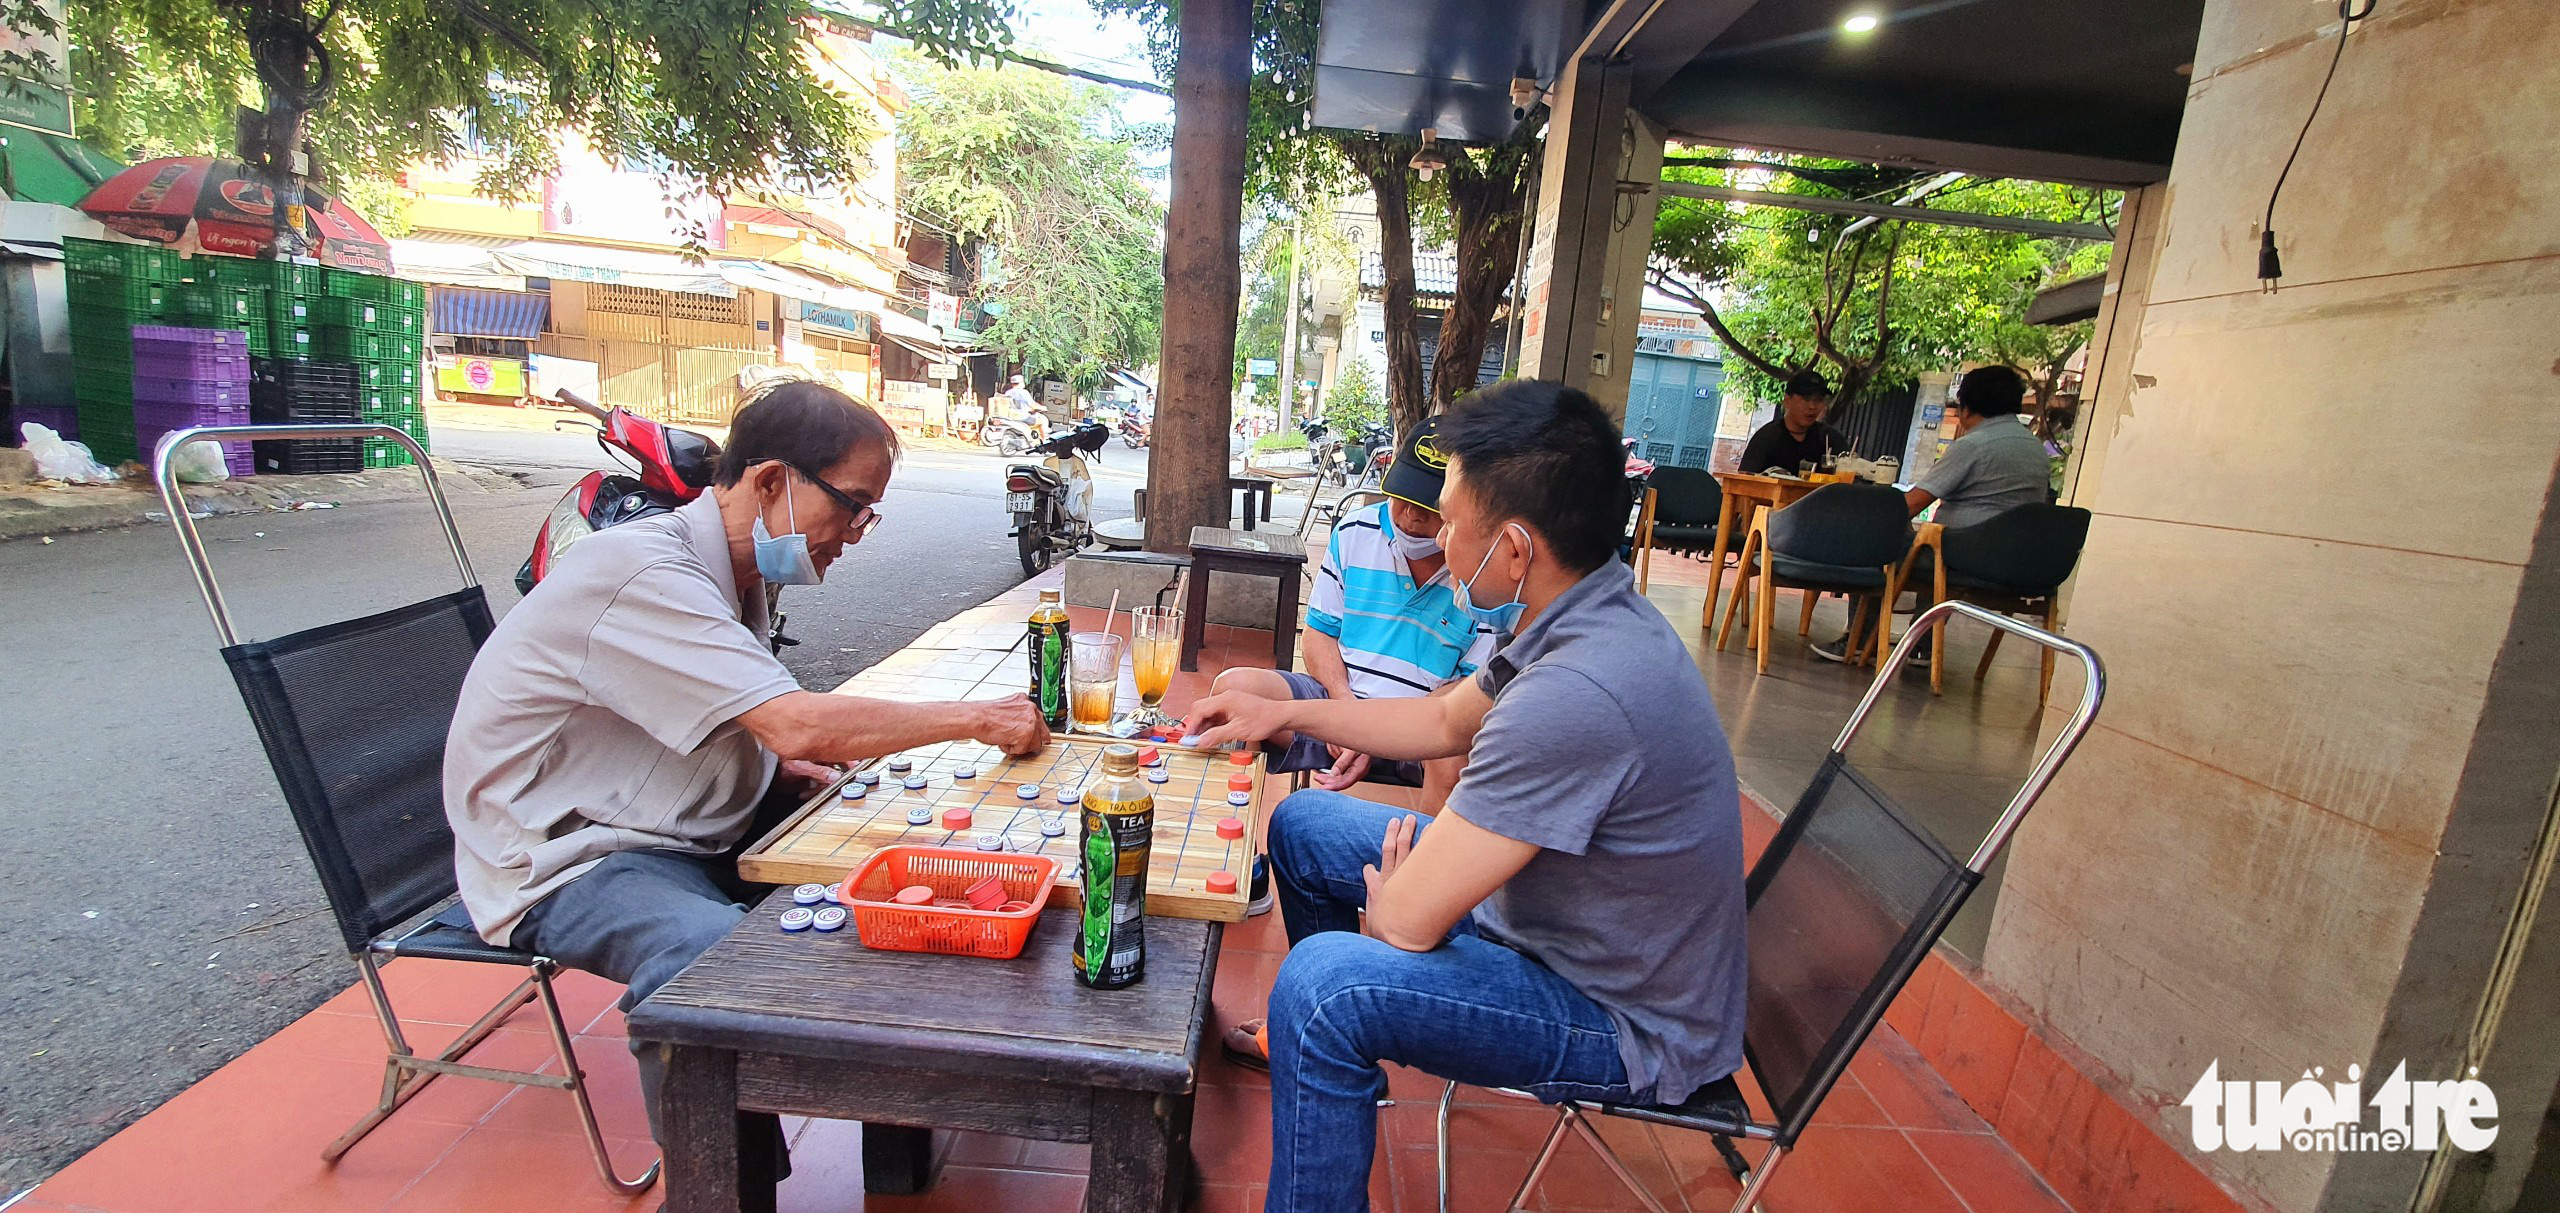 Residents play chess at a café in Ho Chi Minh City, October 28, 2021. Photo: Cong Trung / Tuoi Tre